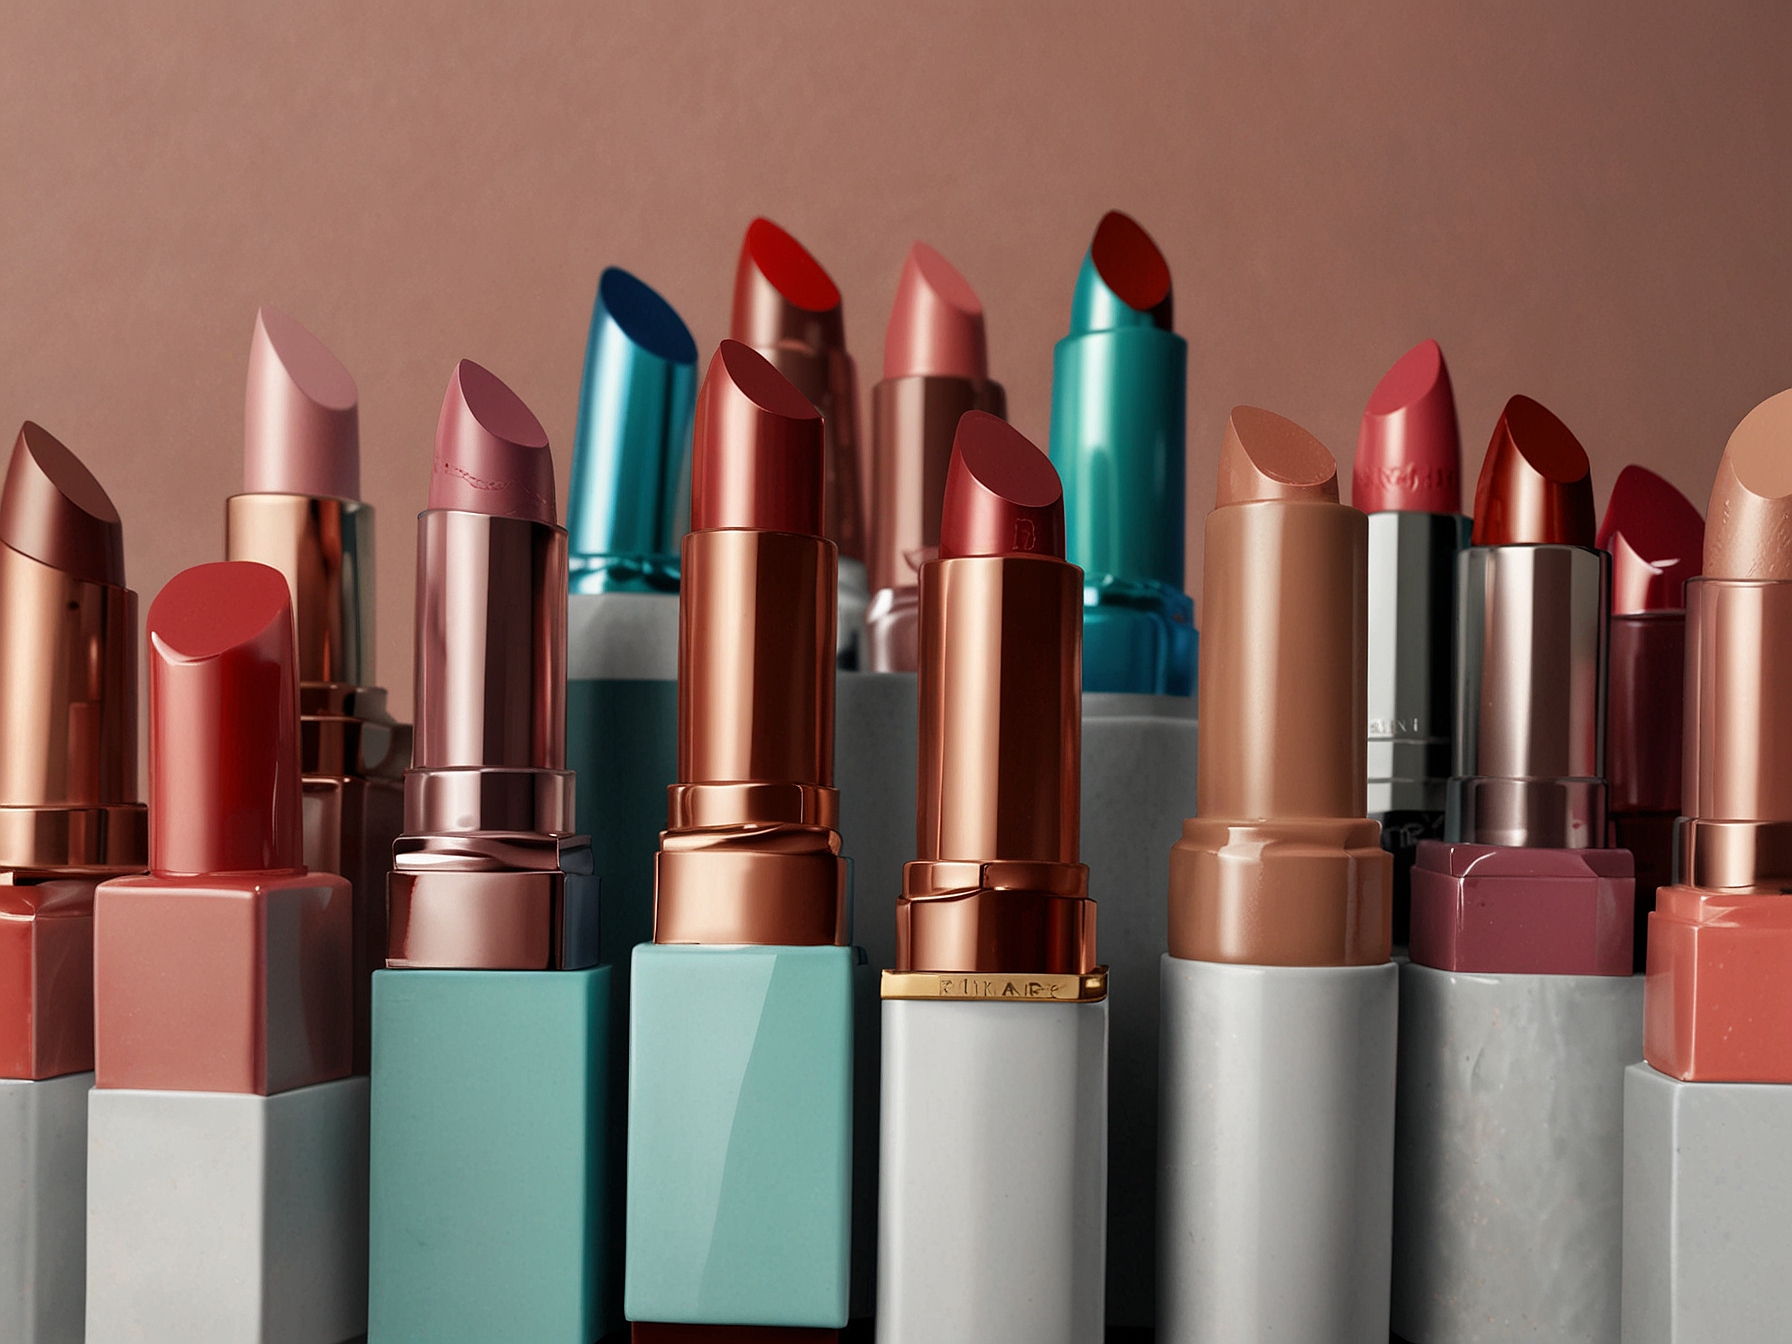 A close-up of Primark's new lip product in various shades, highlighting its sleek packaging and luxurious appearance, ideal for budget-conscious beauty enthusiasts.